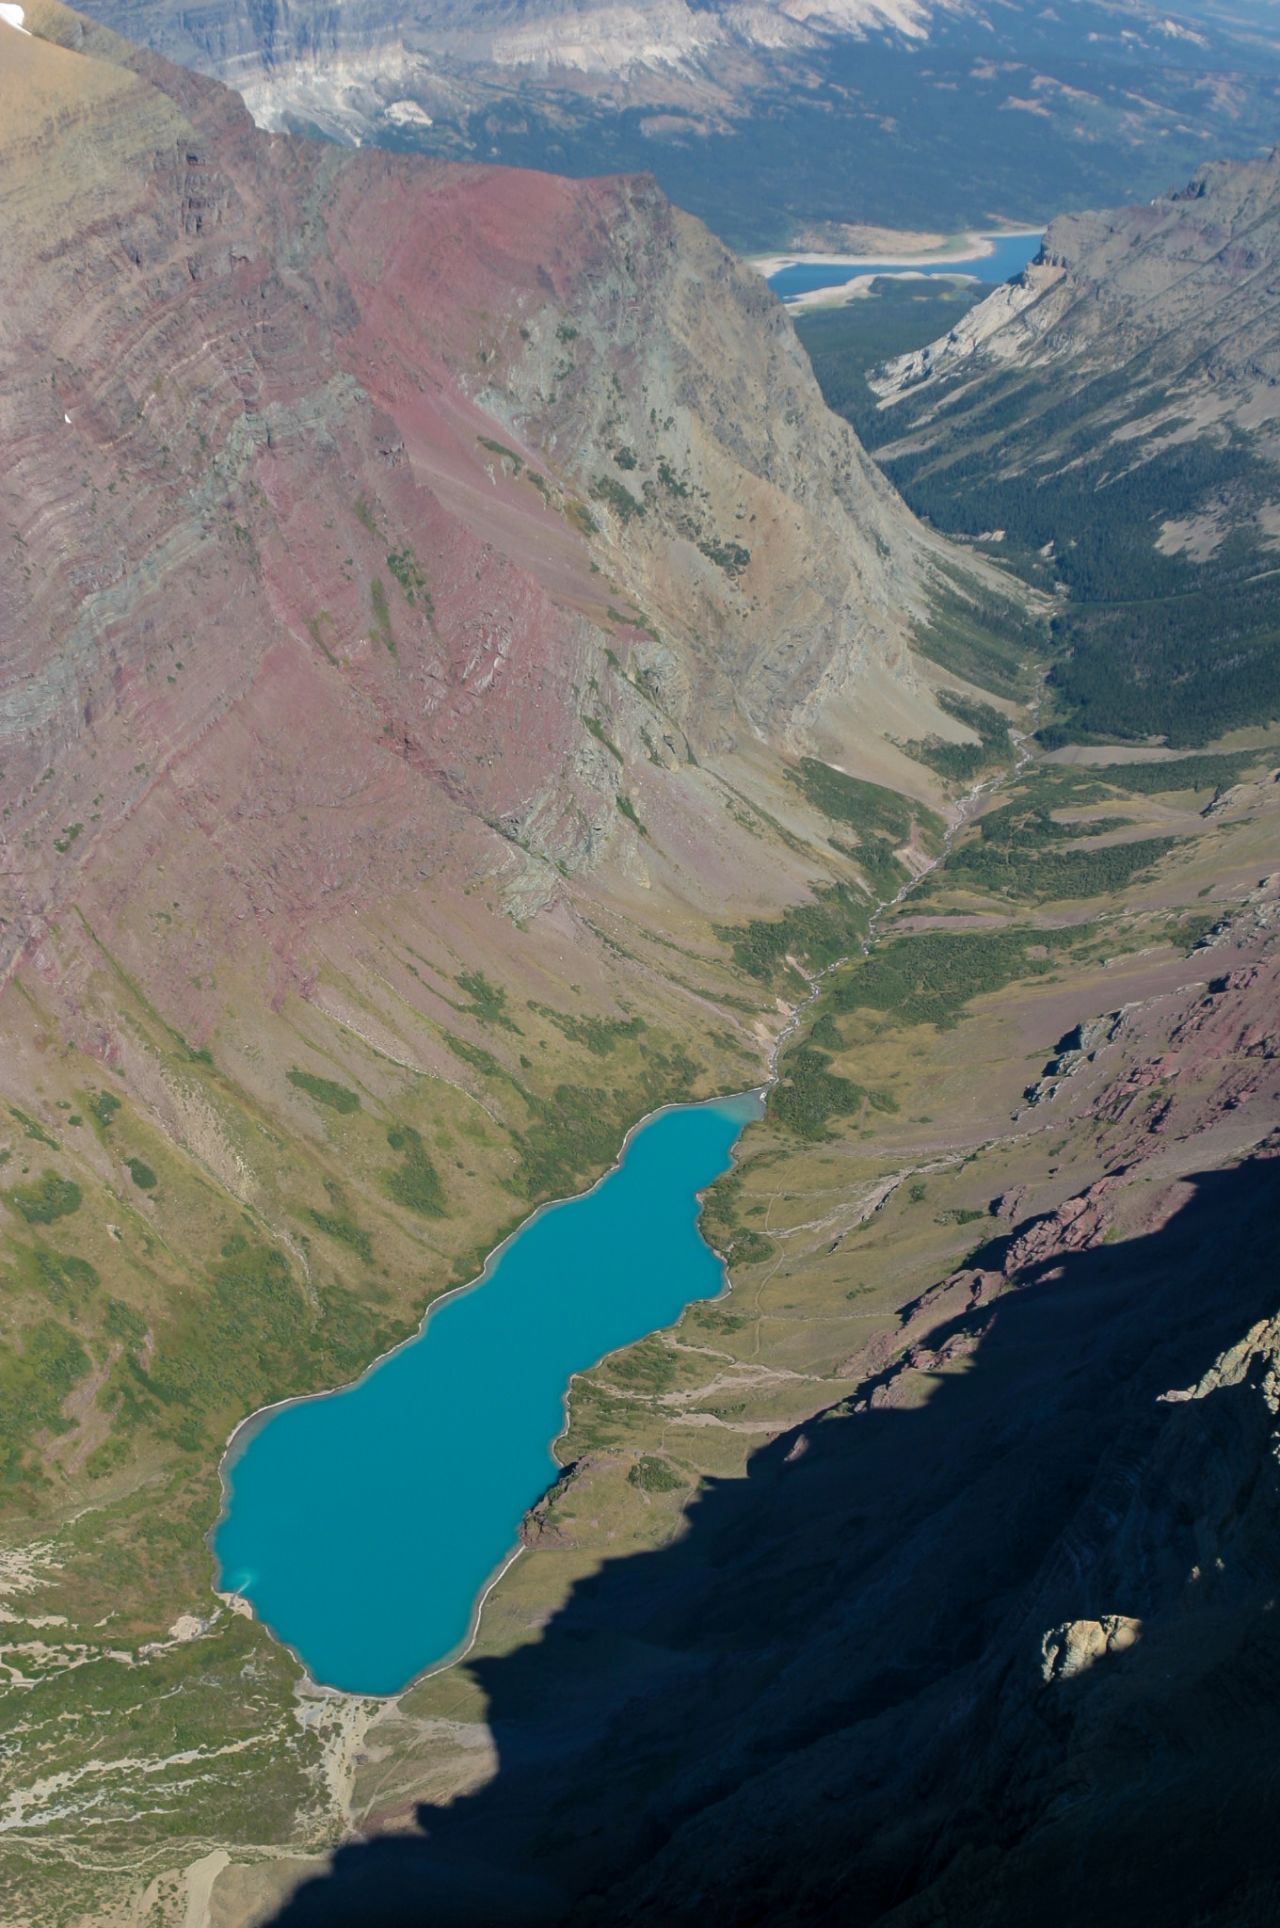 At just over 10,000 feet in elevation, Mount Siyeh in Glacier National Park has spectacular summit views. The north face drops more than 4,000 feet to the turquoise-colored Cracker Lake.